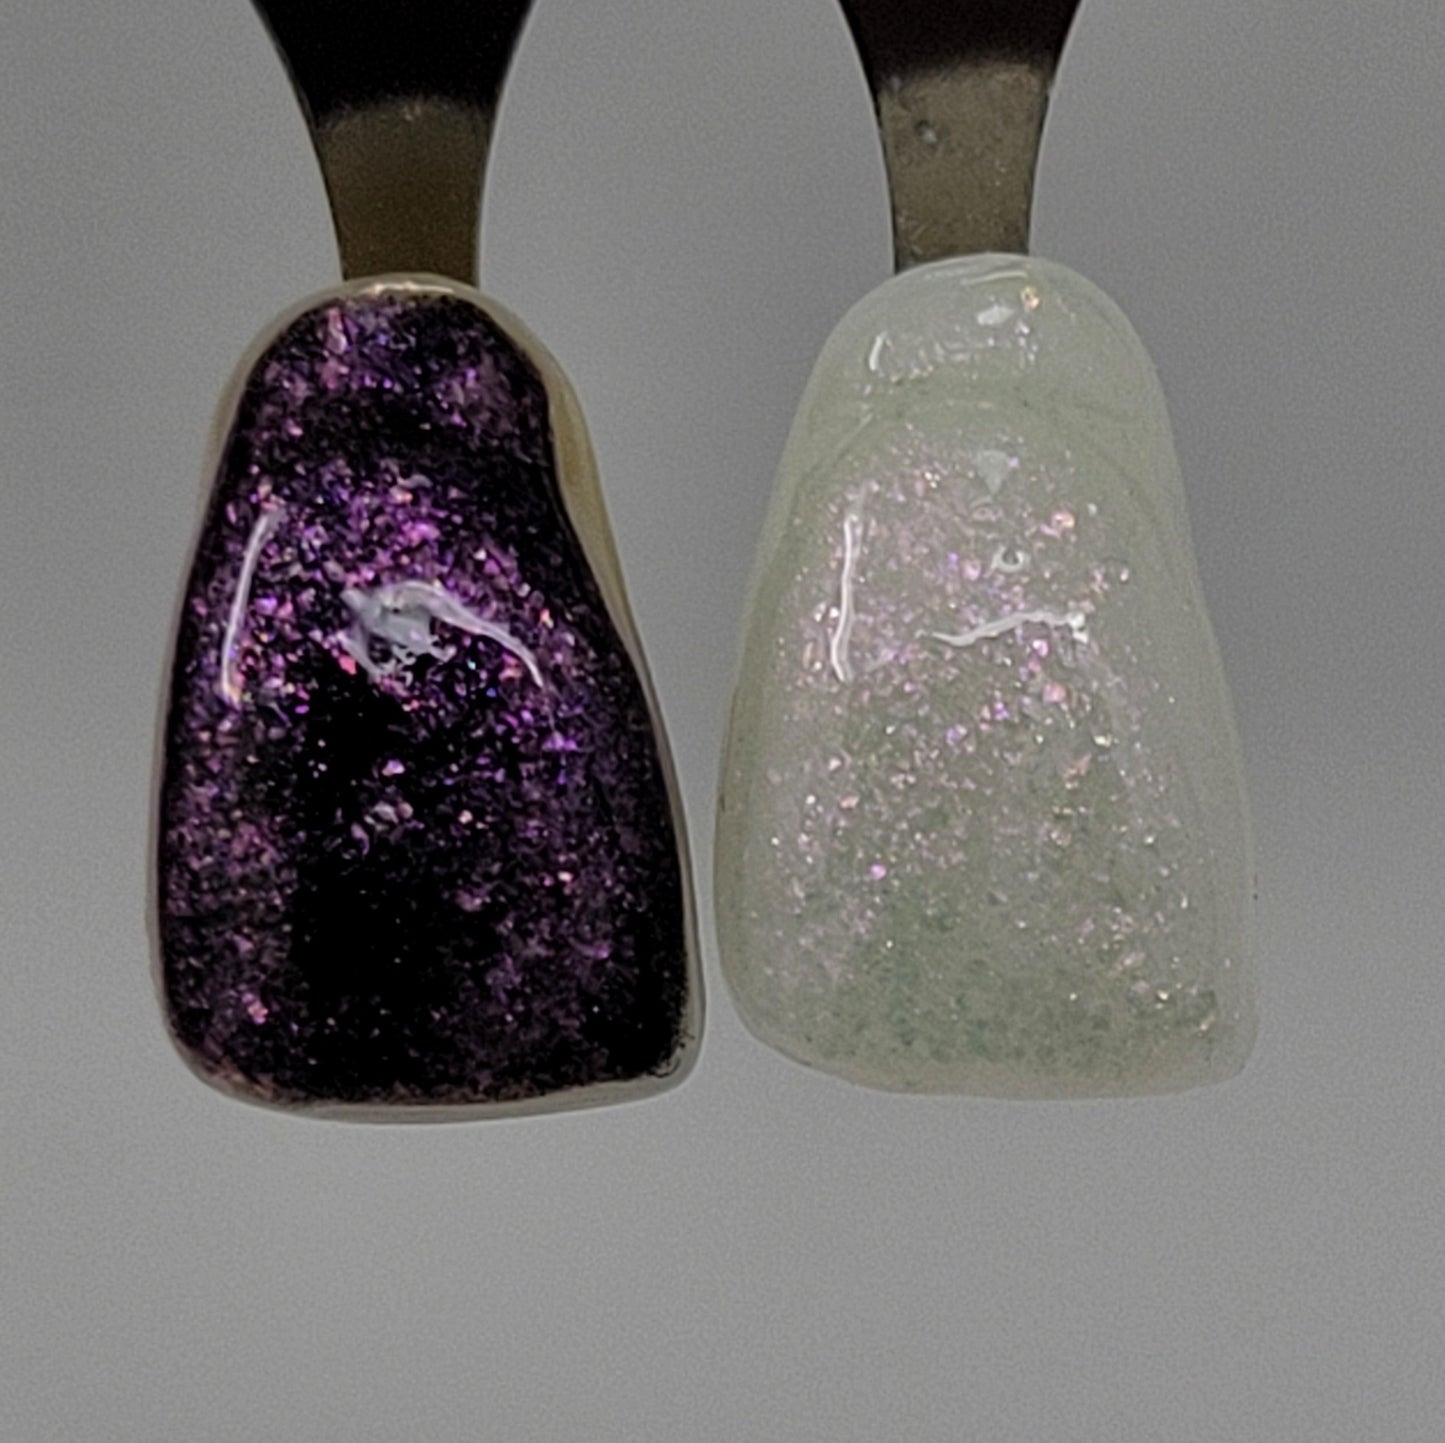 Red Opal Temporary Tattooth Colorant on a demo tooth.  These colorants can be applied to teeth to temporarily alter their color or iridescence.